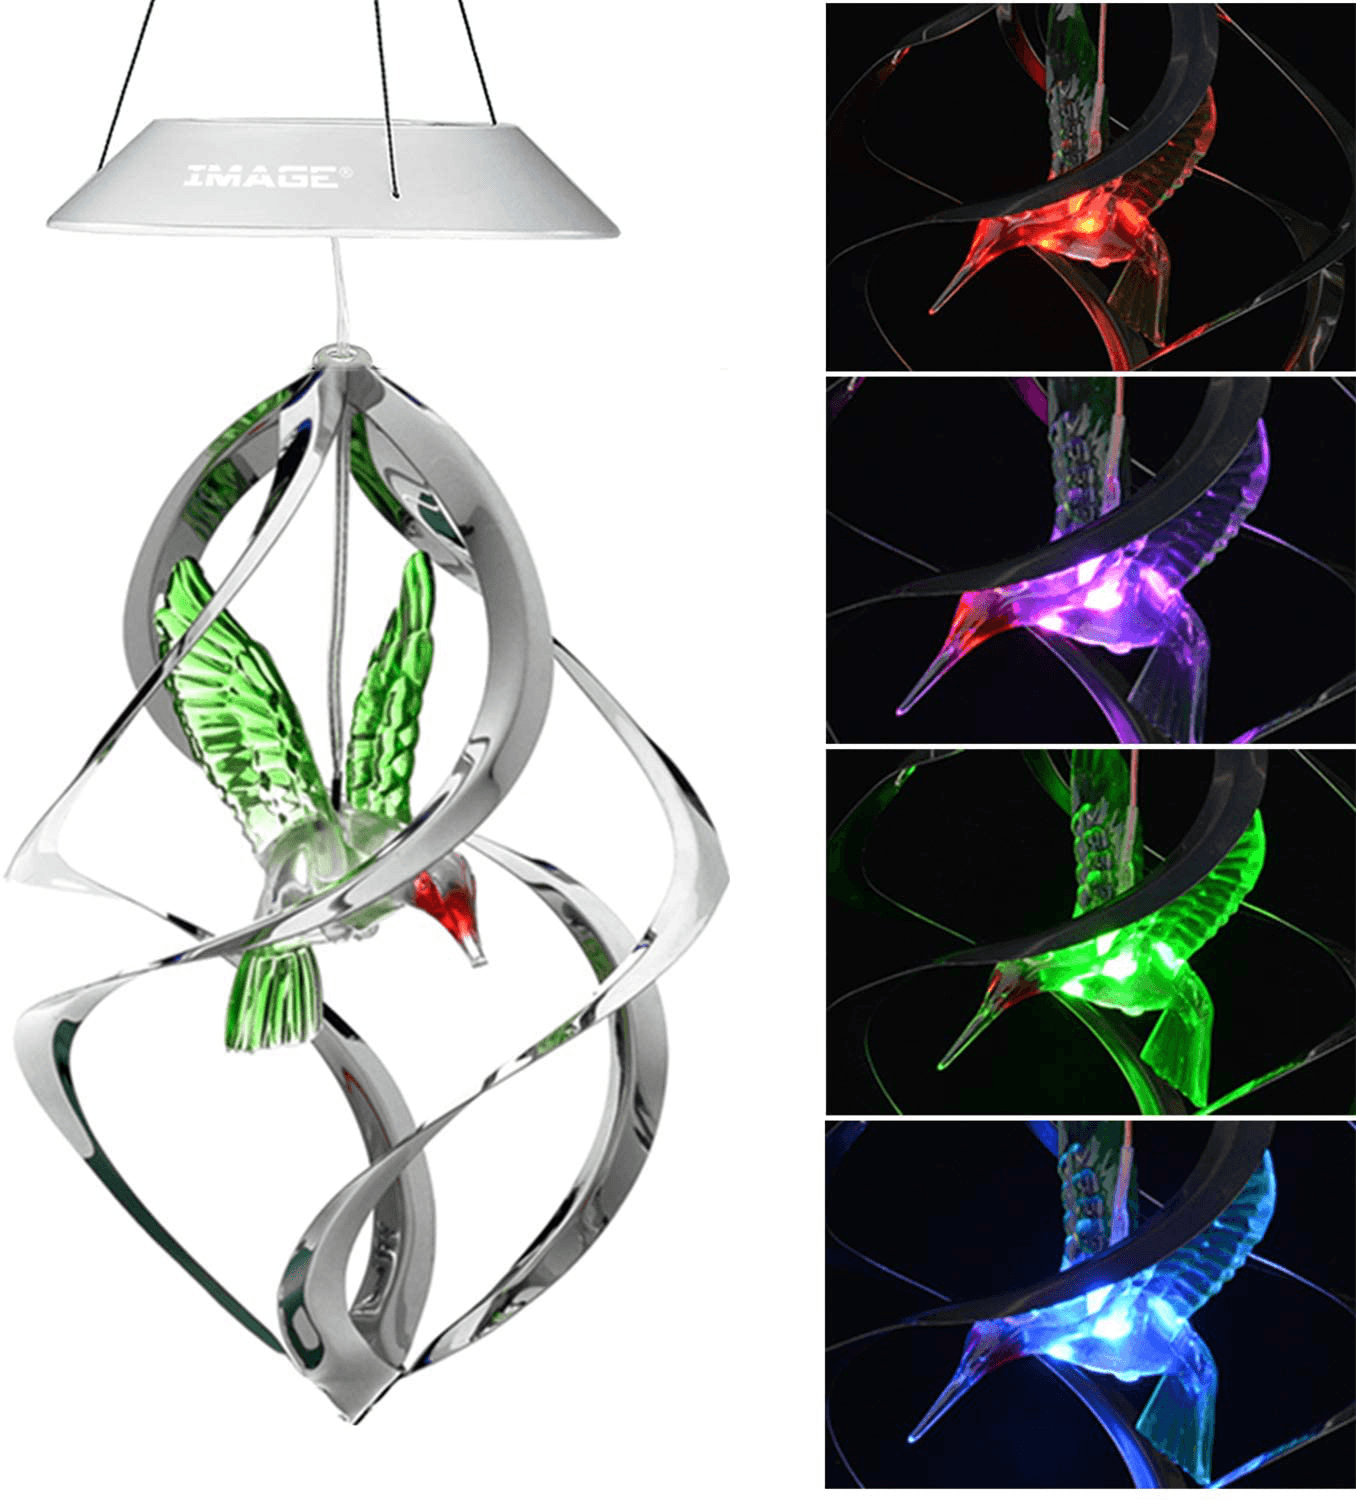 Solar led light outdoor Color Changing Waterproof Wind chime Hummingbird  Butterfly Solar Lamp Decor Patio Yard Garden Light